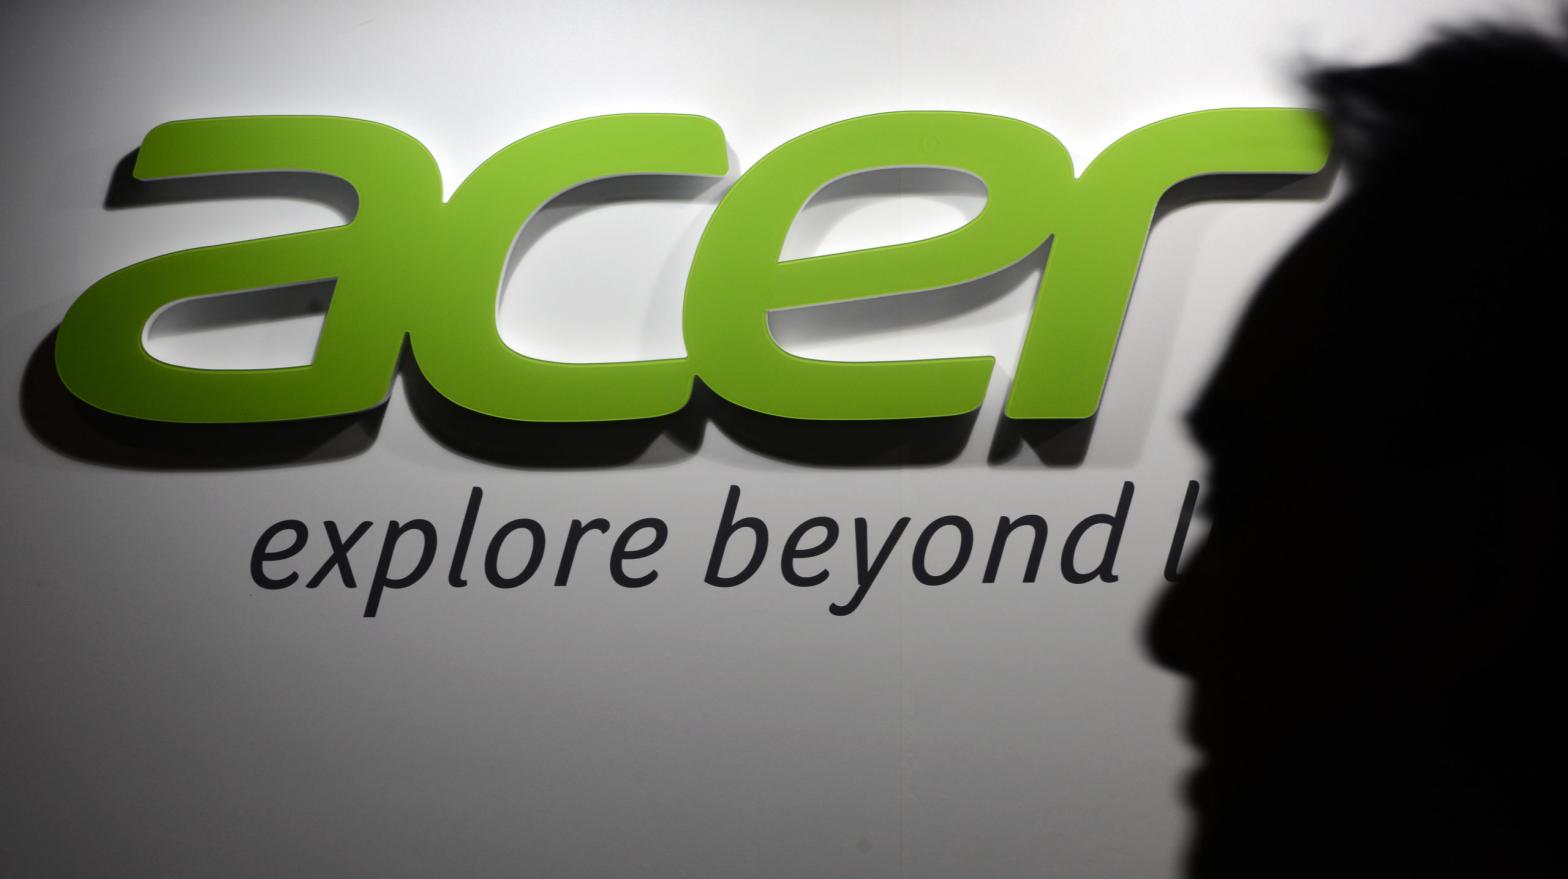 Acer has reportedly been hit with a $US50 ($65) million ransomware attack, the largest attempted ransom to date. (Photo: Sam YEH / AFP, Getty Images)